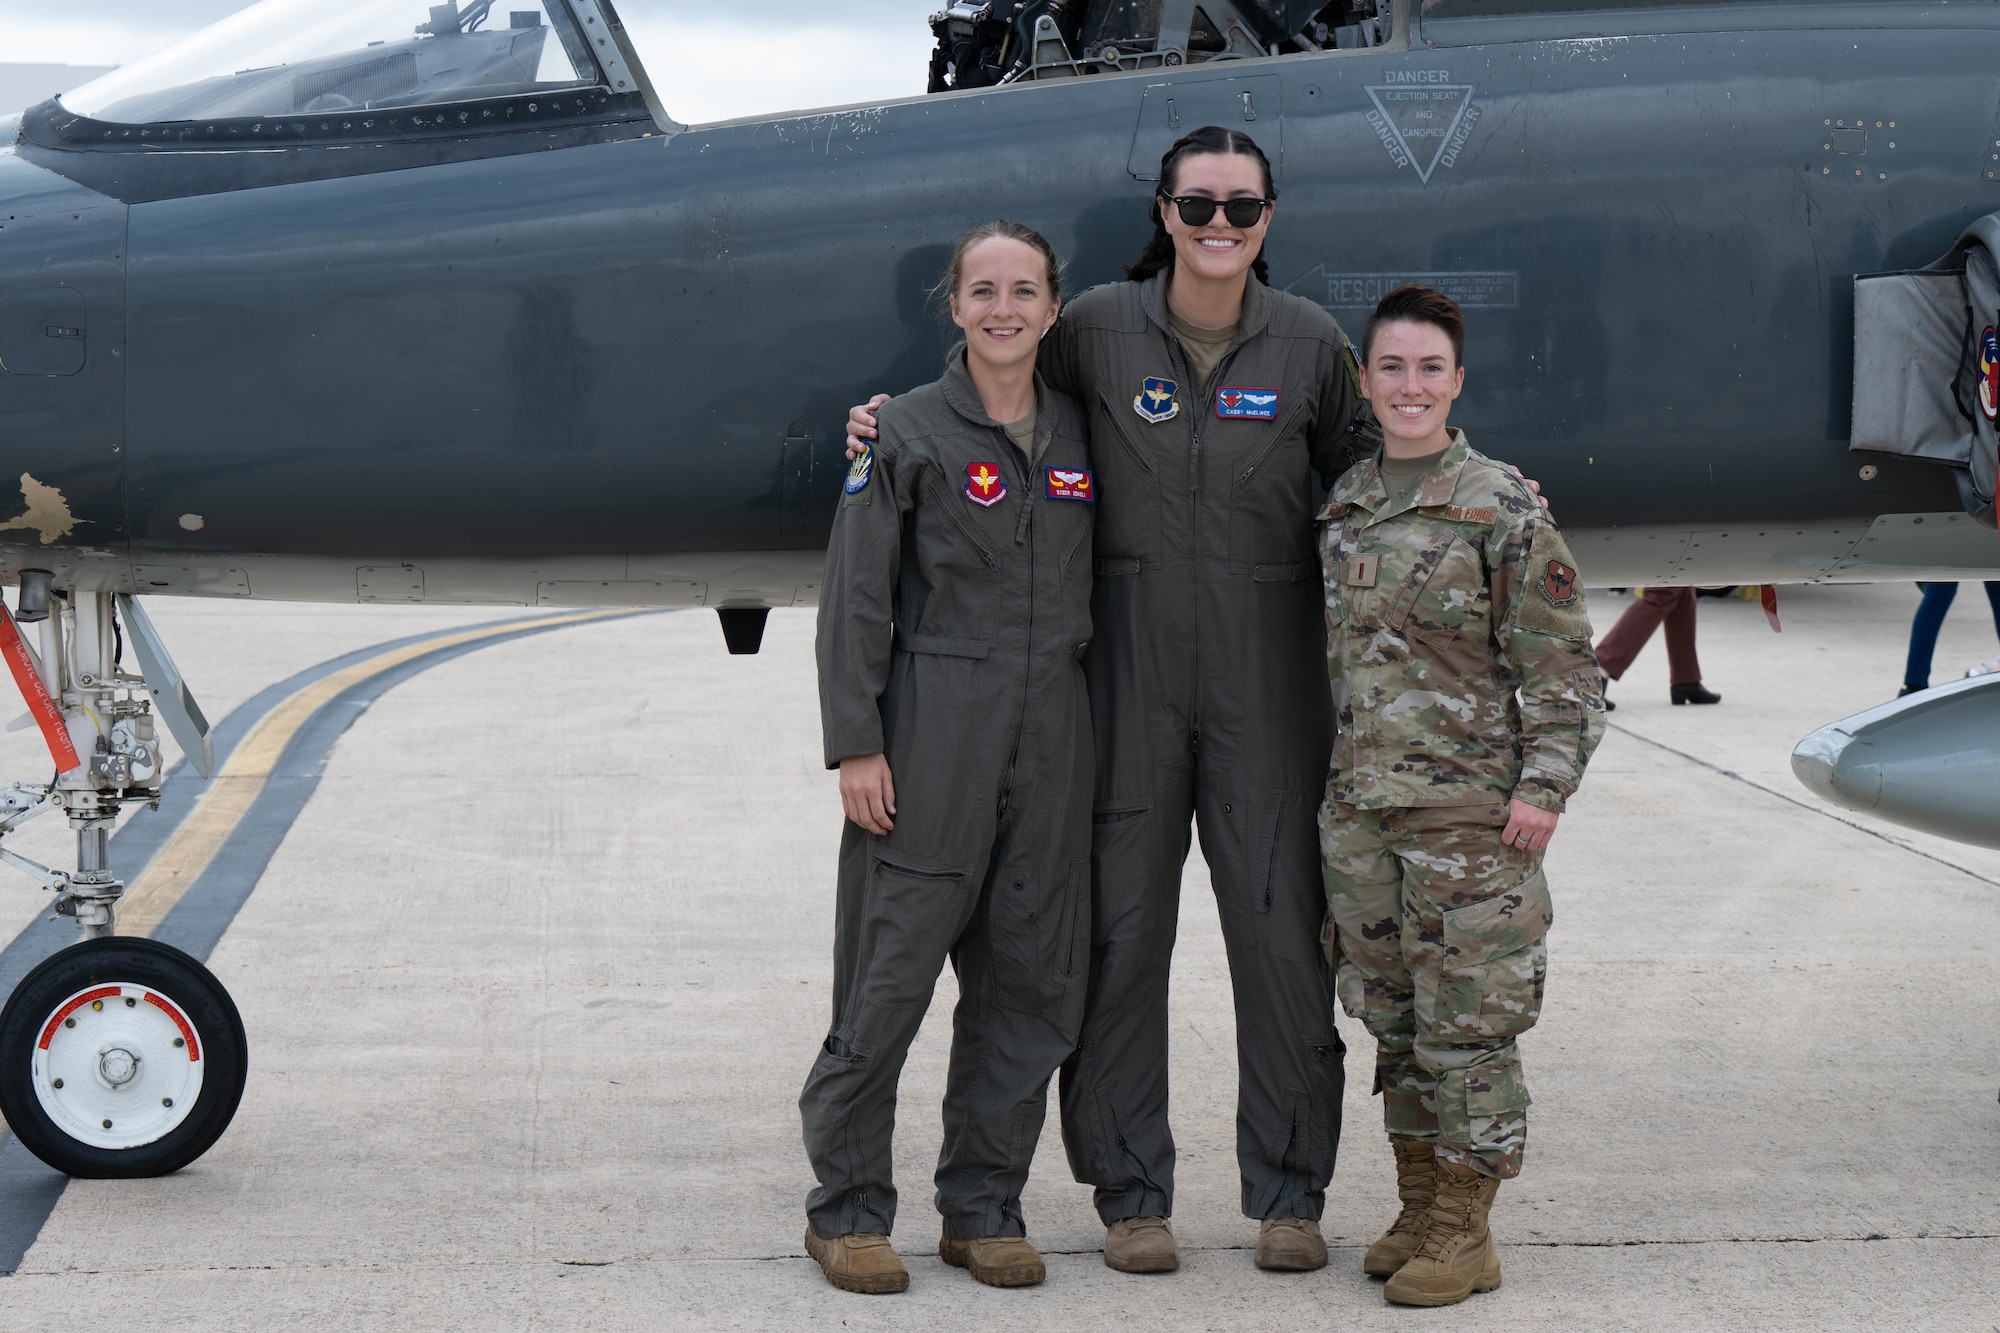 U.S. Air Force T-38 Talon instructor pilots 1st Lt. Kaylee Eskeli and Capt. Cassandra McElwee, 87th Flying Training Squadron, and 2nd Lt. Brittany Stanley, a pilot-awaiting-training assigned to 306th Operations Support Squadron, pose for a photo during Girls in Aviation celebration at Kelly Field, Joint Base San Antonio-Lackland, Texas, Sept. 21, 2023. About 400 local students attended the event, which showcased women from across Air Education and Training Command and their aircraft. The women represented various career fields, such as pilots, maintainers and boom operators. (U.S. Air Force photo by Airman 1st Class Gabriel Jones)